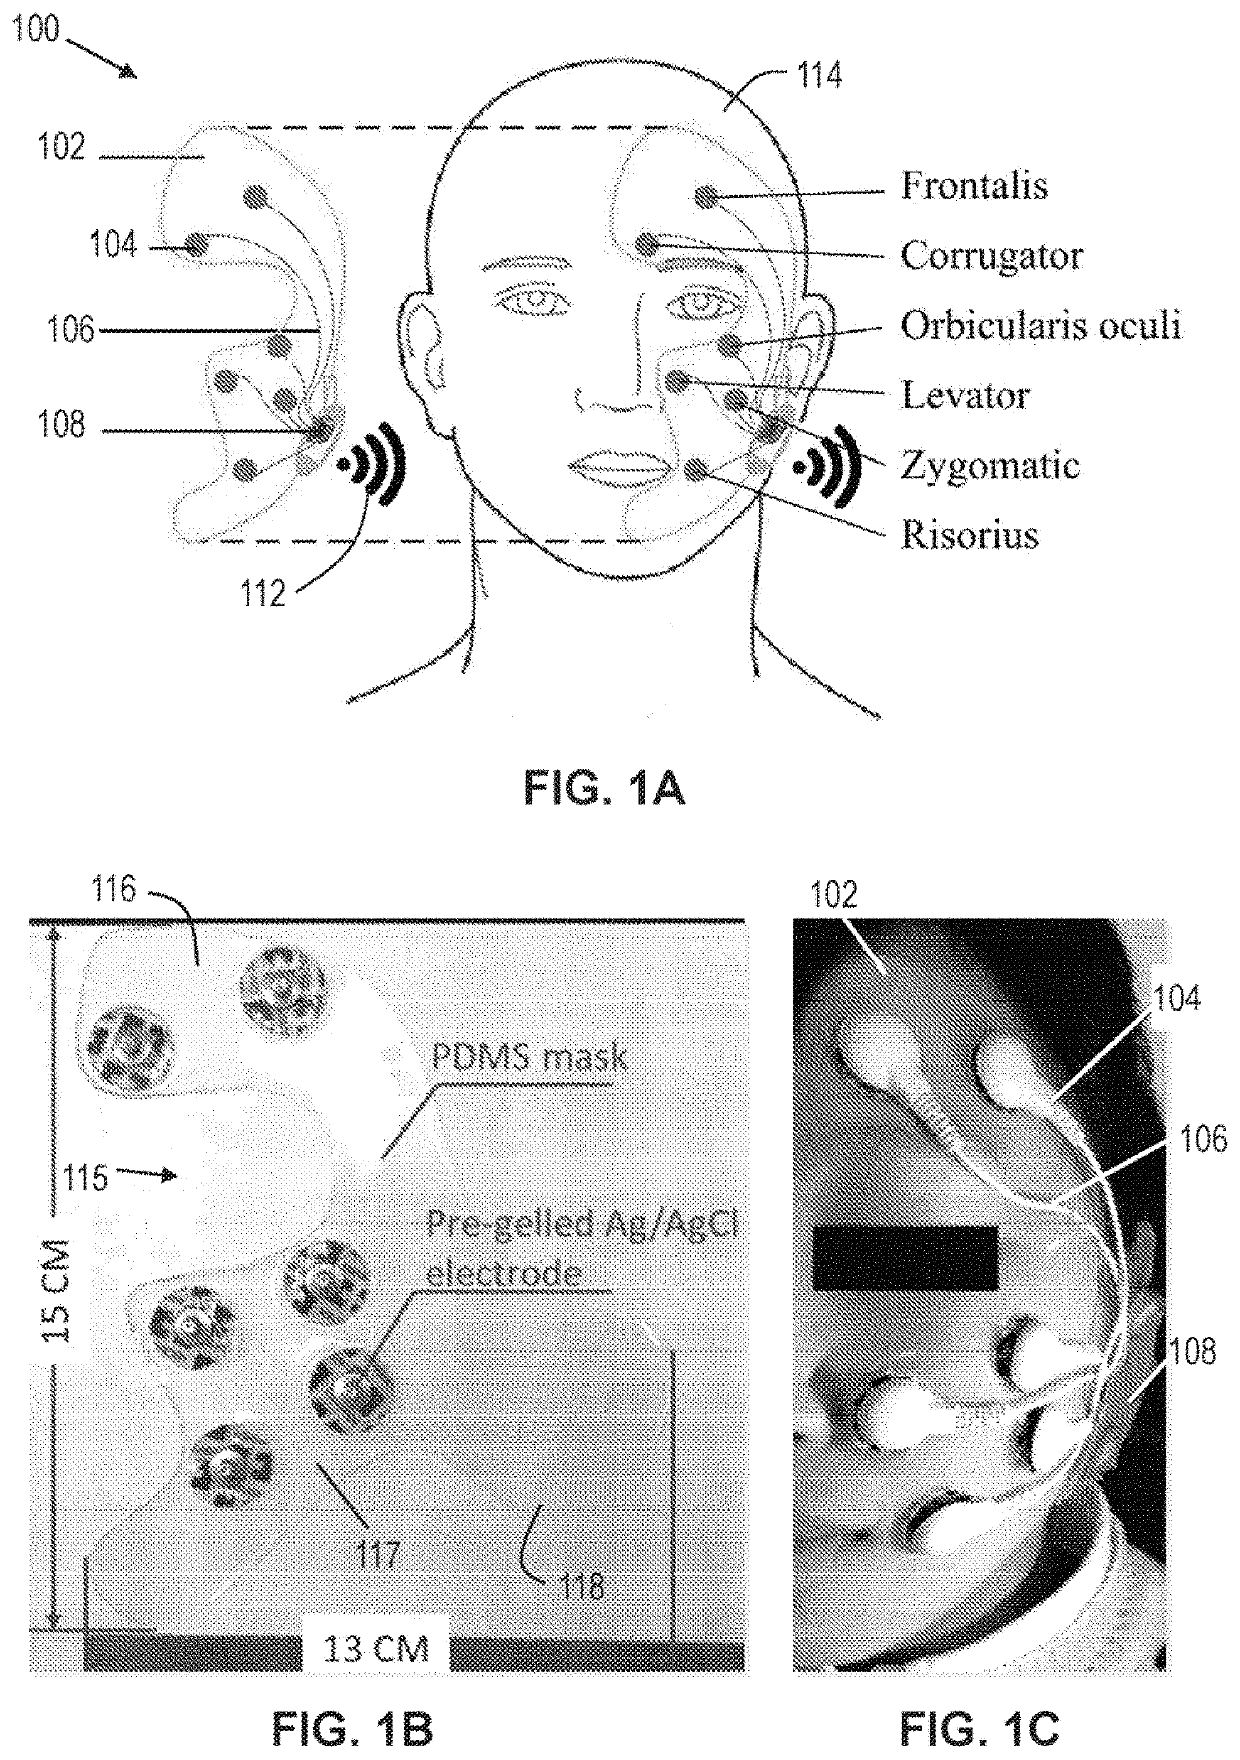 Pain assessment method and apparatus for patients unable to self-report pain